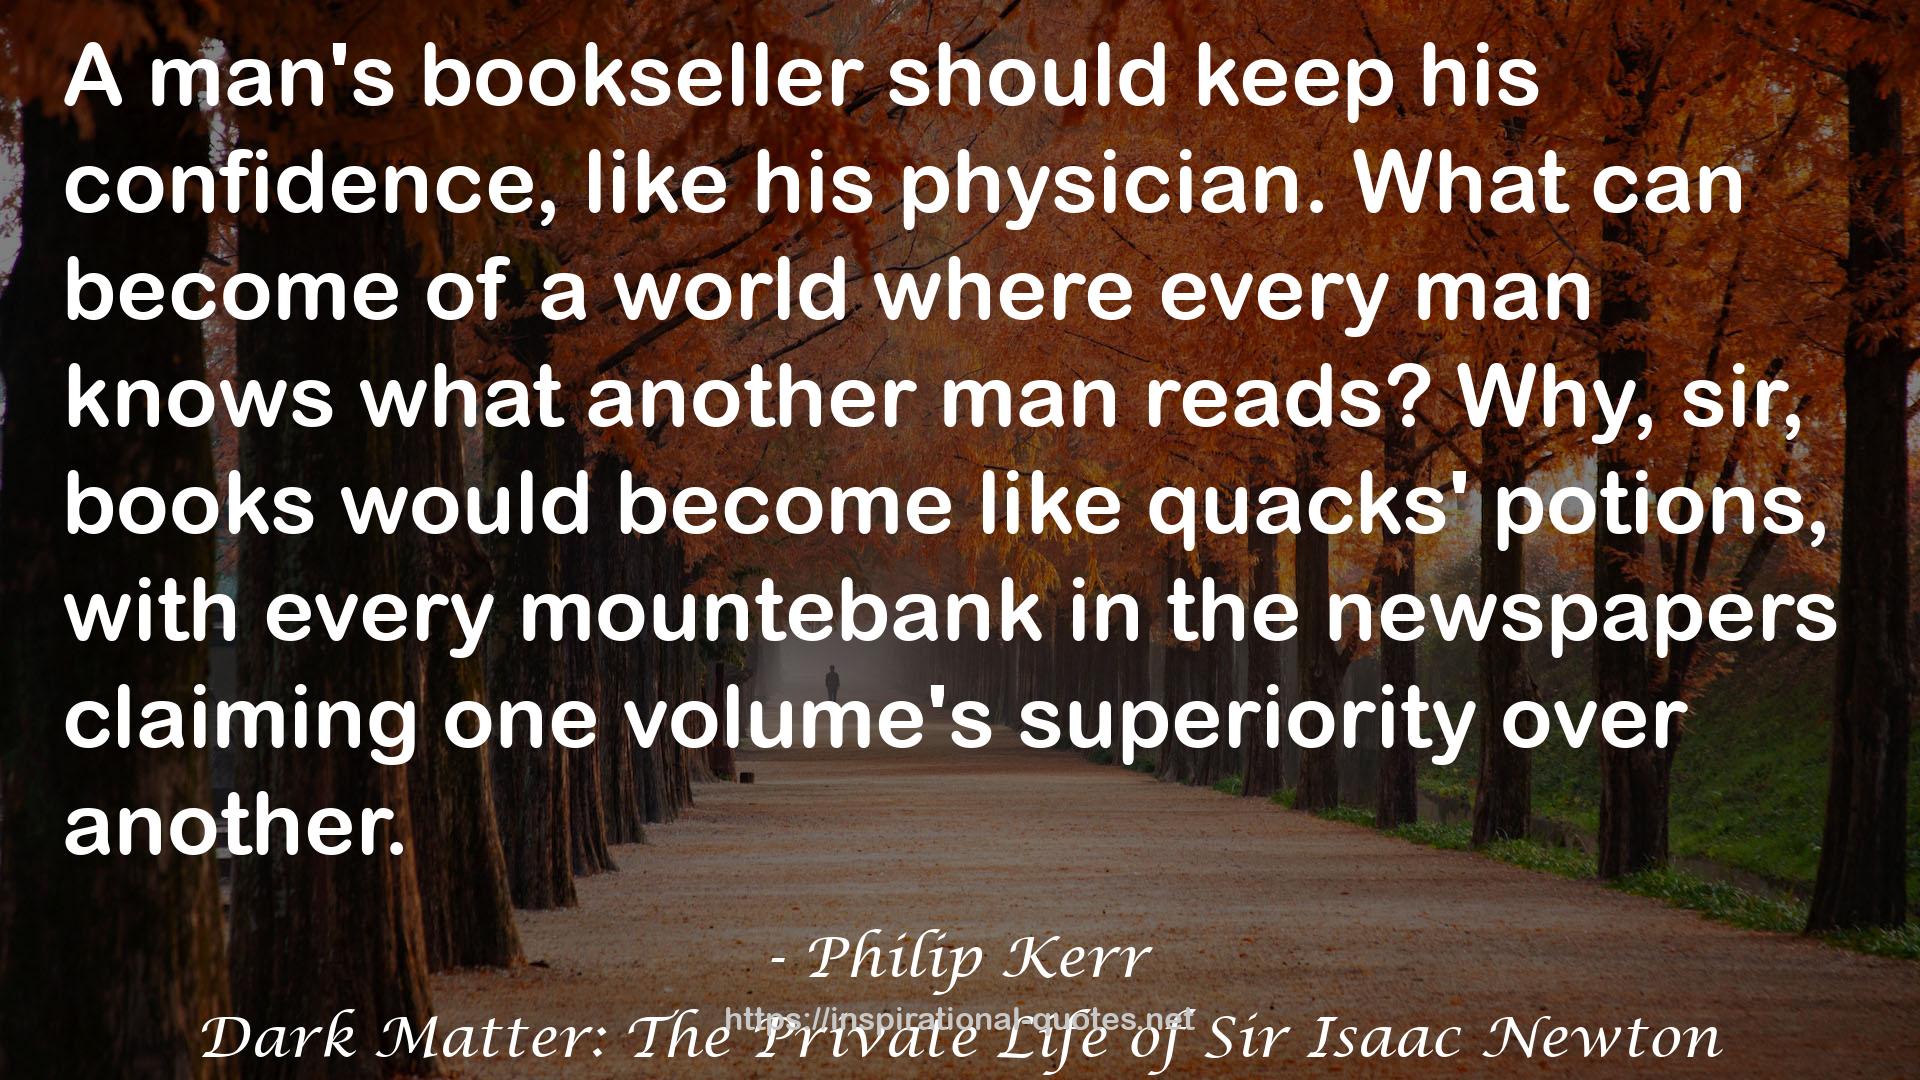 Dark Matter: The Private Life of Sir Isaac Newton QUOTES